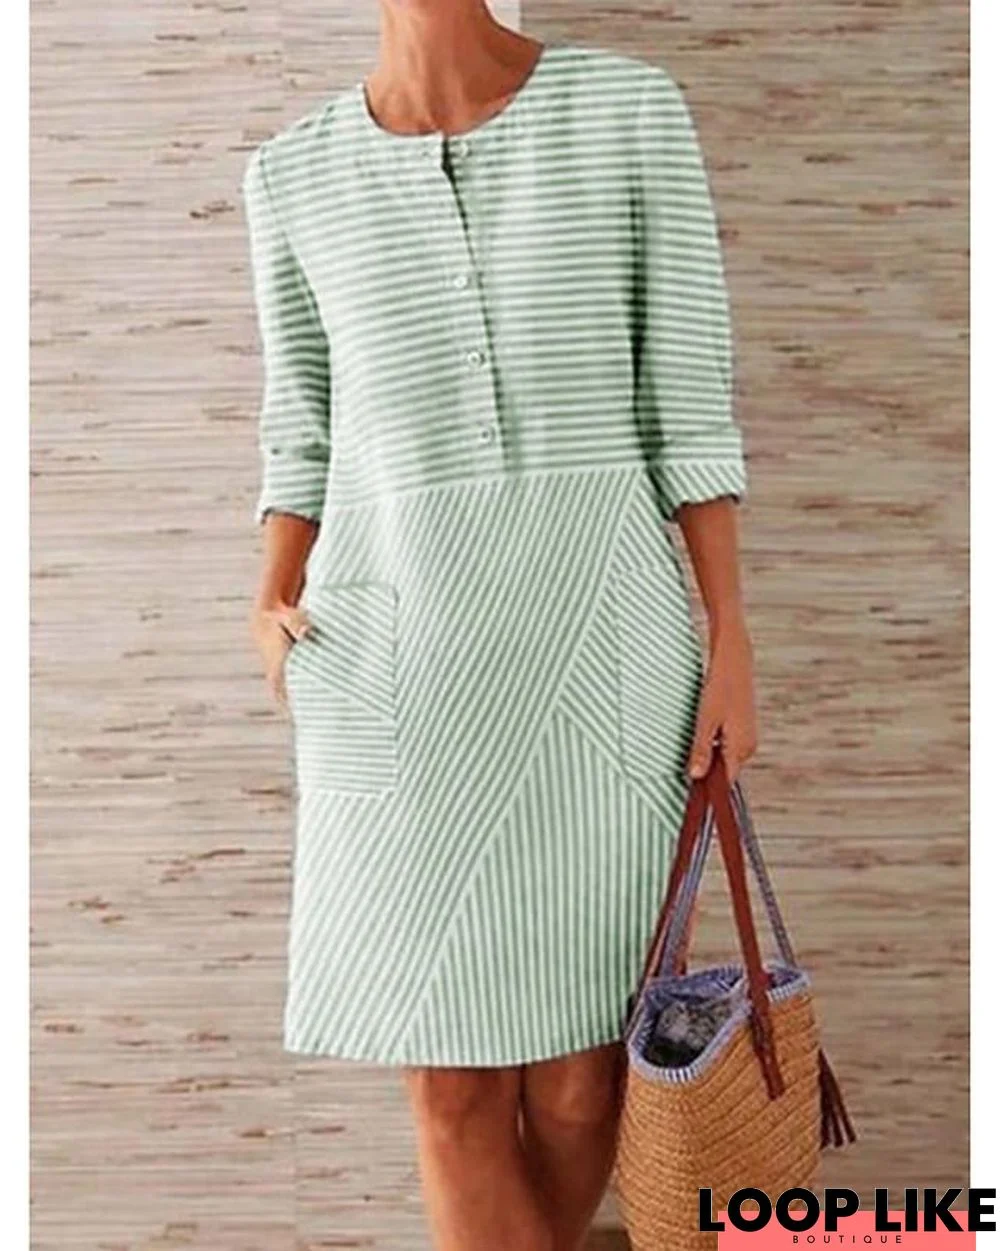 Women's Shift Dress Knee Length Dress - 3/4 Length Sleeve Striped Solid Color Clothing Summer Hot Casual Holiday Loose Blue Green Gray S M L XL XXL 3XL